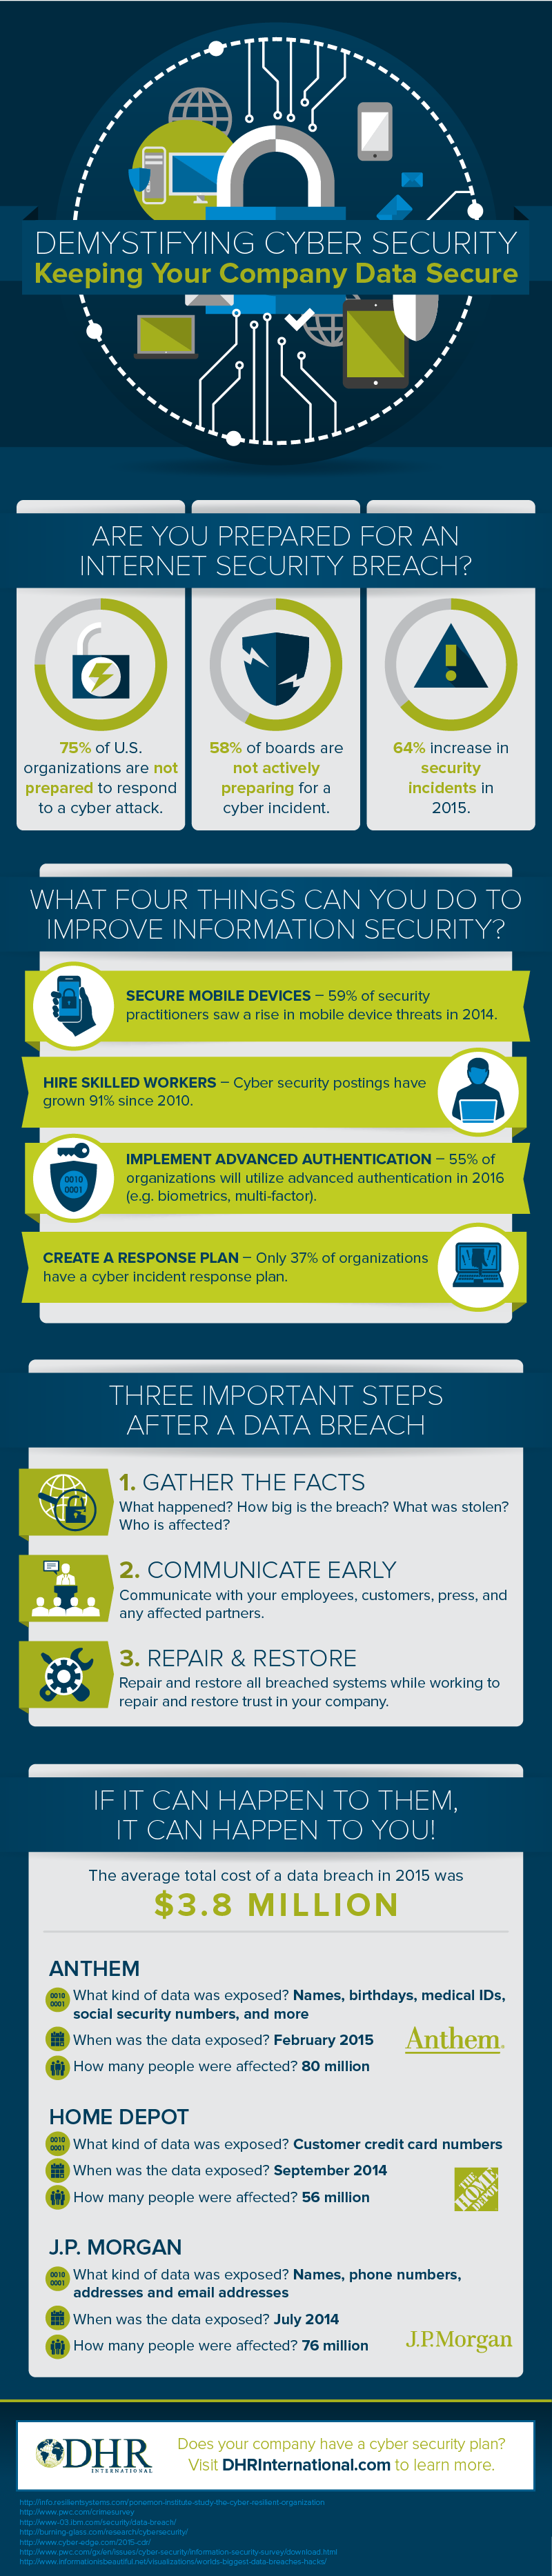 Demystifying cyber security - infographic by DHR International